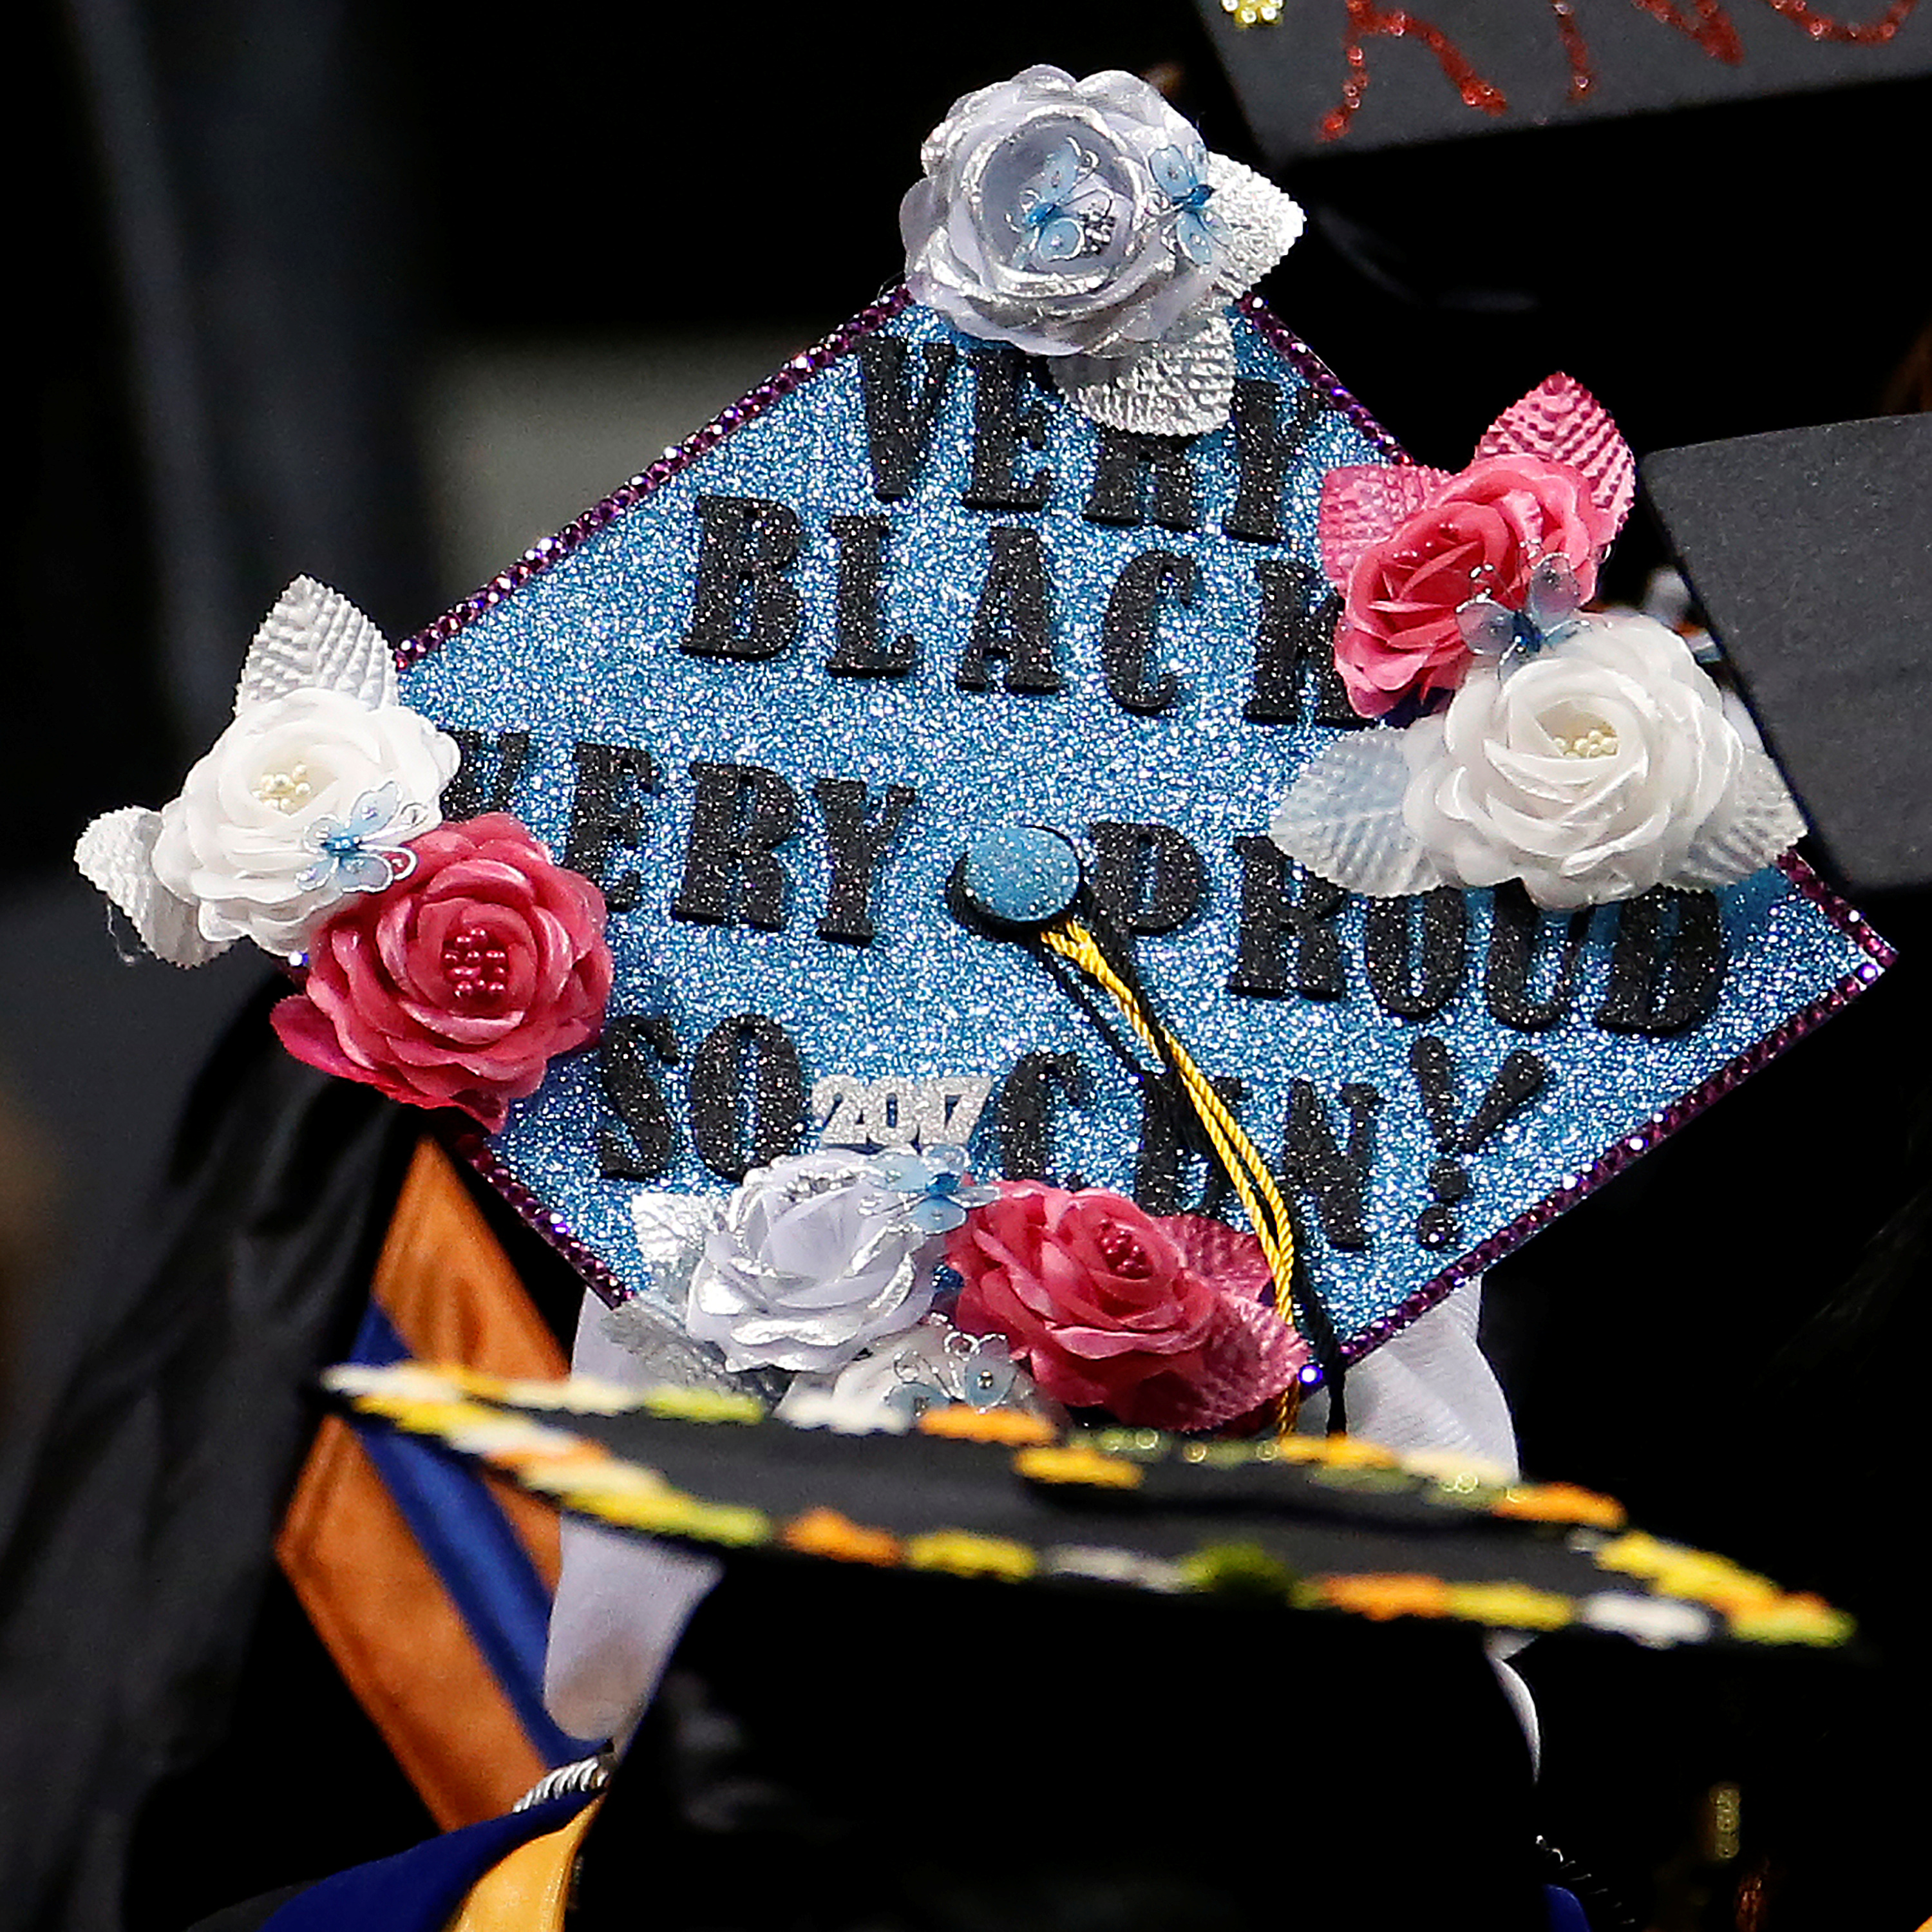 A graduate's mortar board hat is pictured during a commencement for Medgar Evers College in the Brooklyn borough of New York City